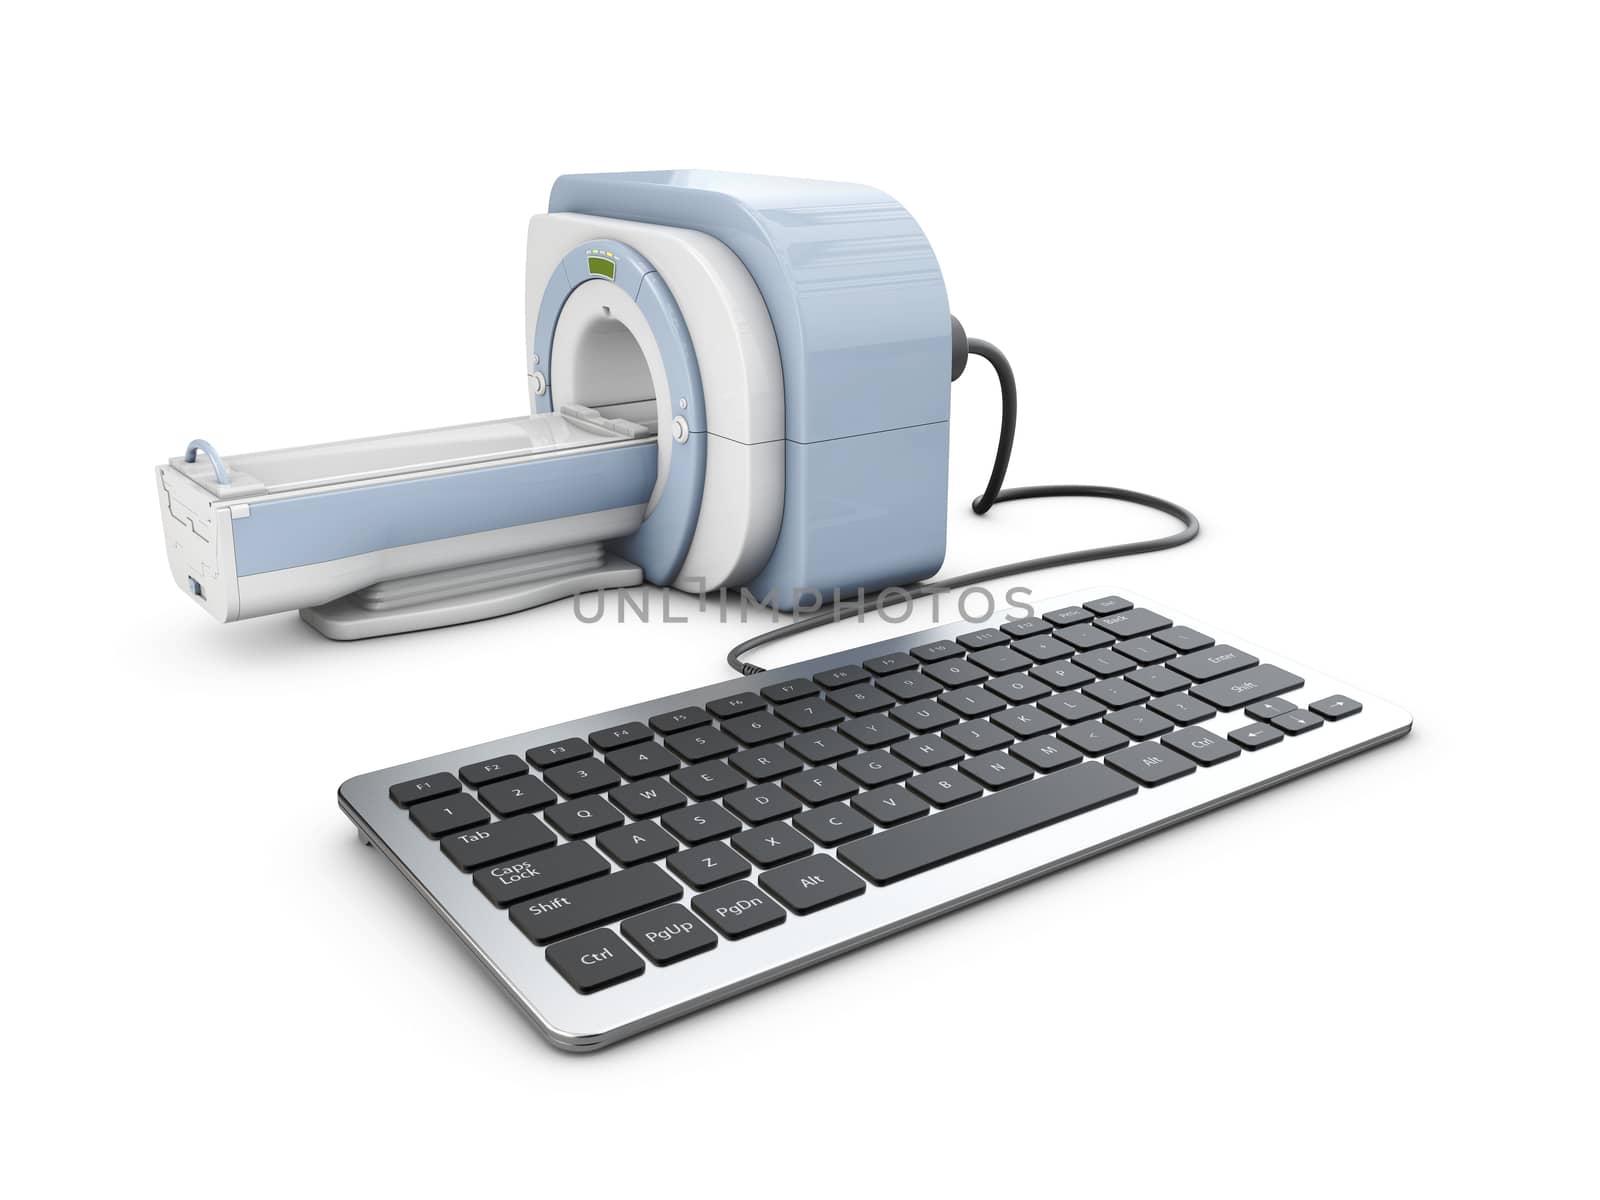 3d illustration of keyboard and magnetic resonance imaging machine.